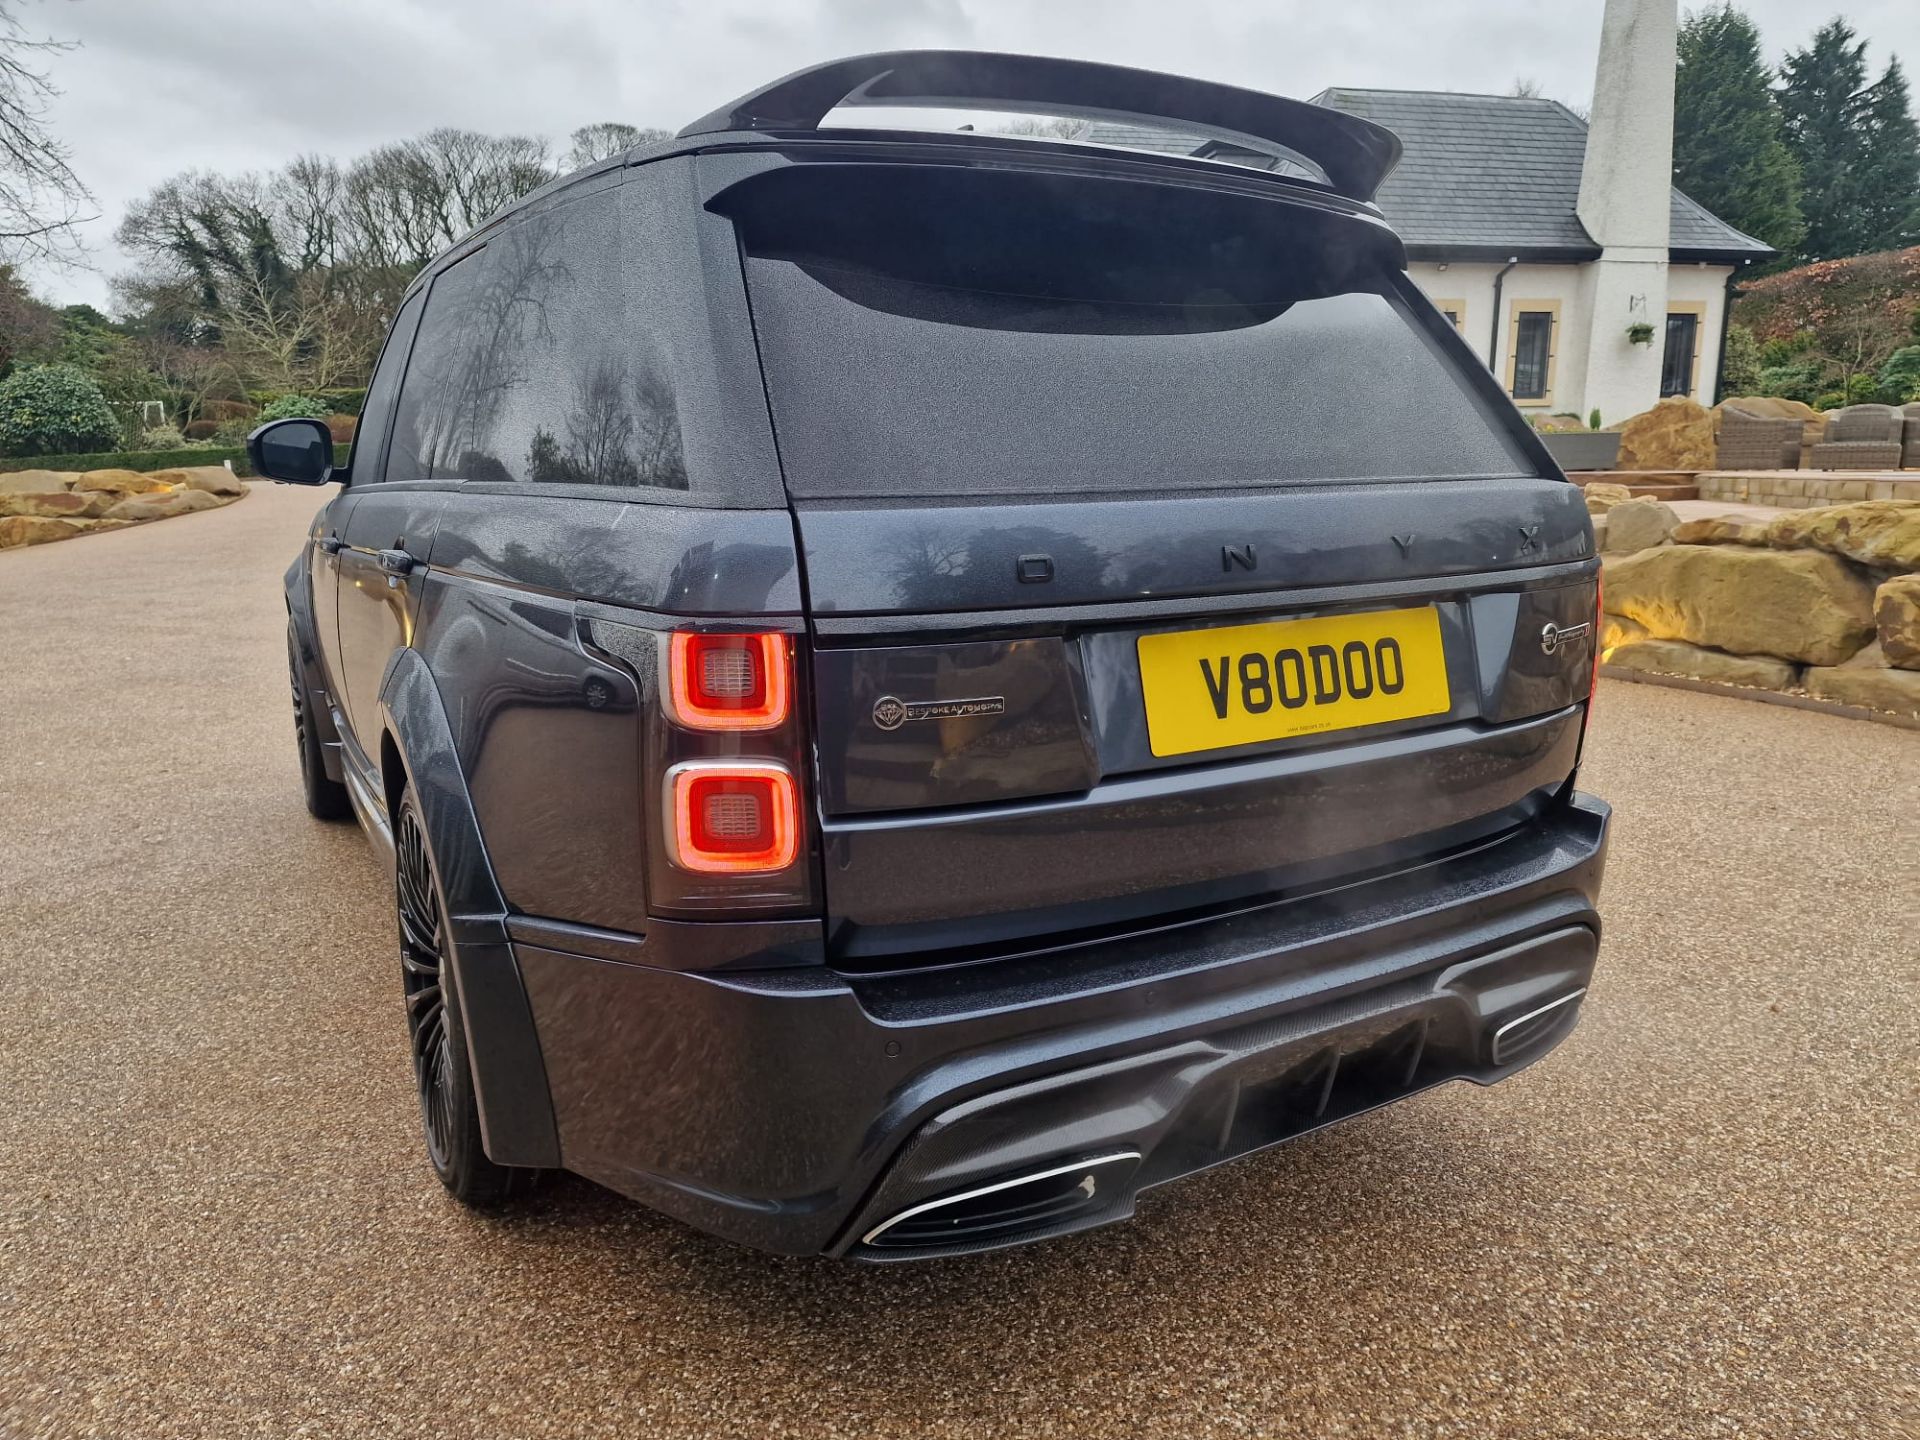 2018/68 RANGE ROVER SV AUTOBIOGRAPHY DYN V8 SC AUTO - £40K WORTH OF ONYX BODY KIT AND CONVERSION - Image 12 of 77